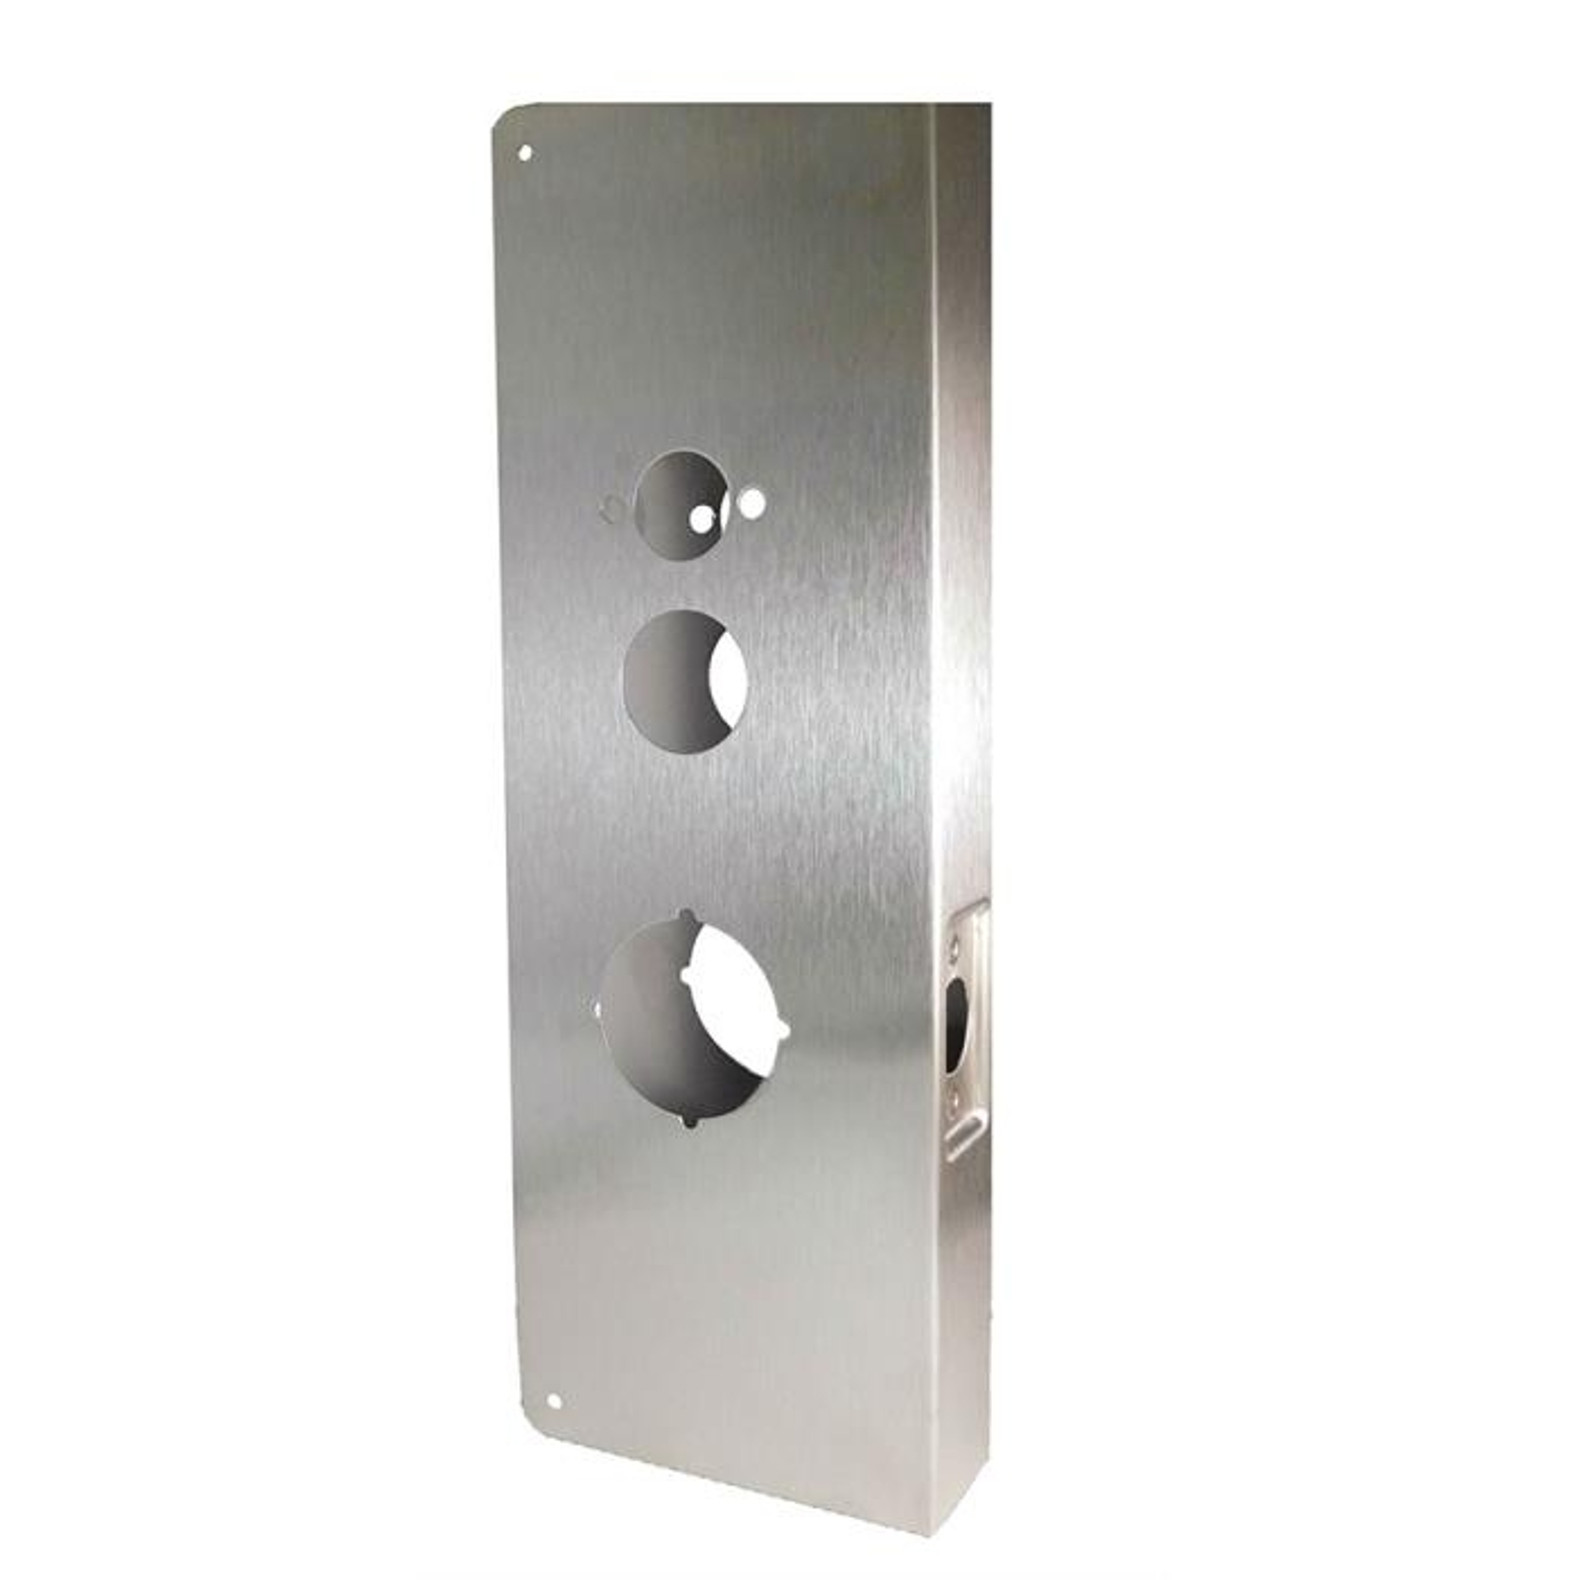 General Lock Remodeling Wrap-Around Plate for Kaba Simplex 1000, 2-3/4